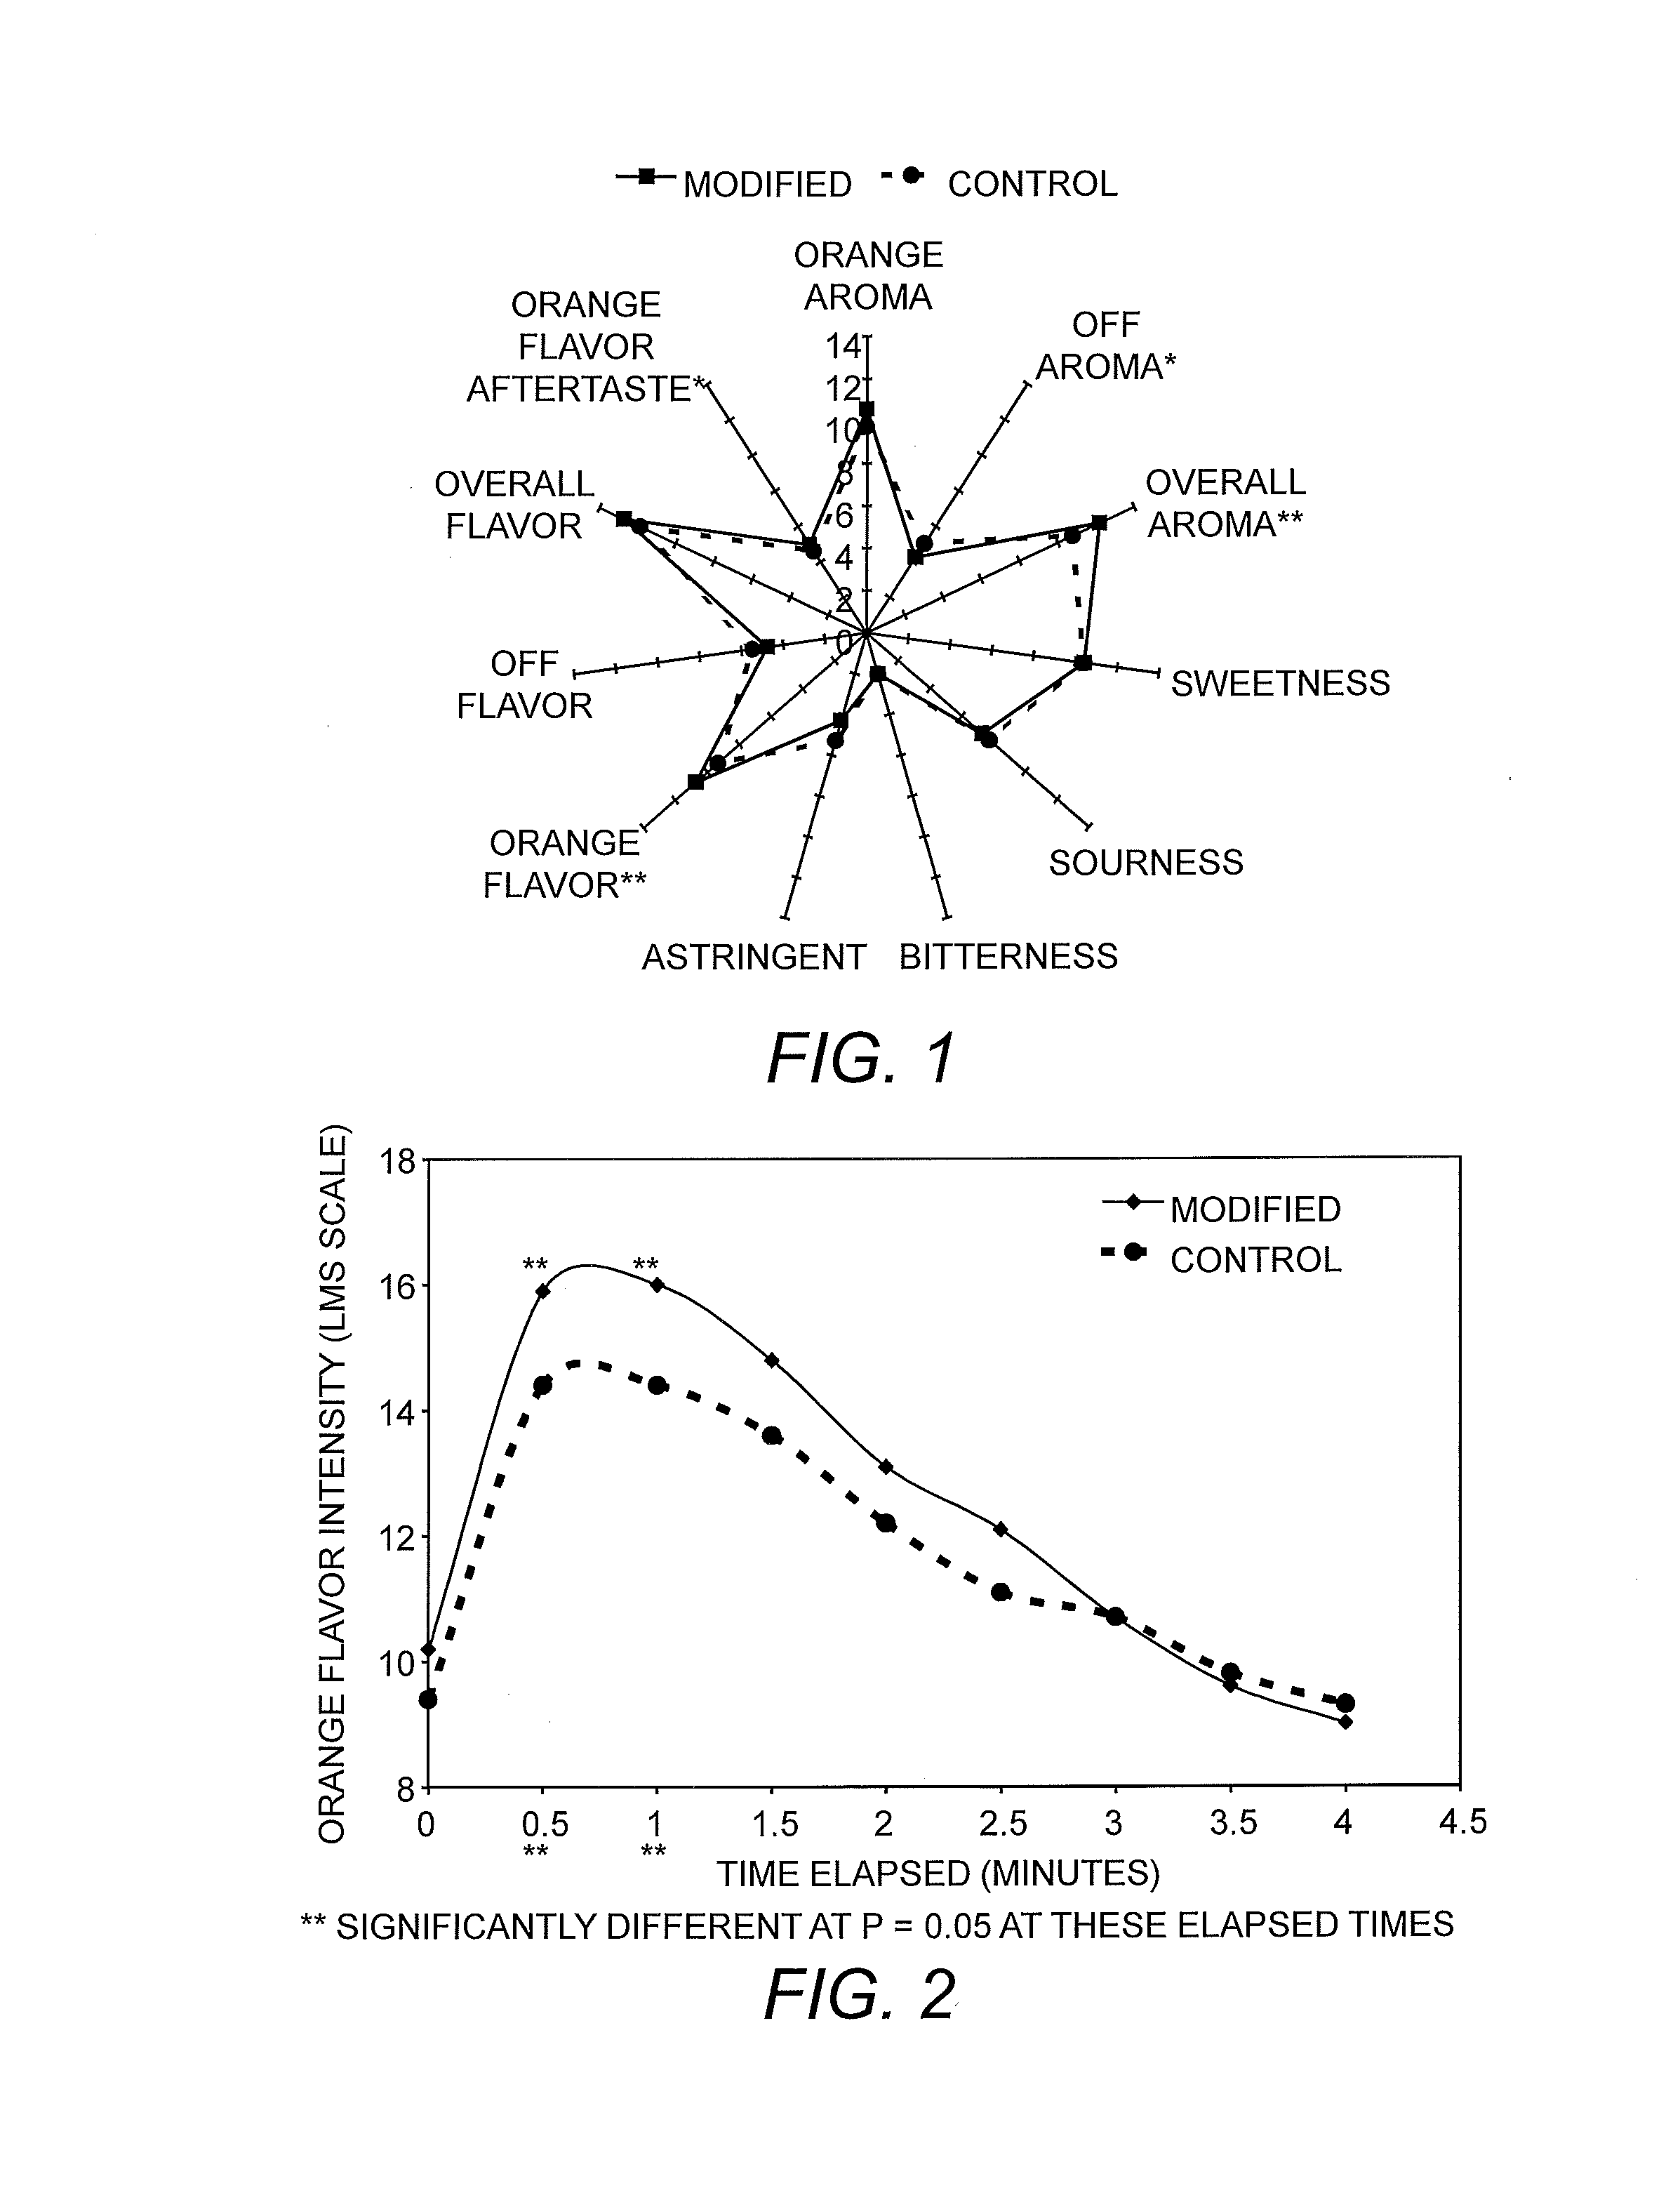 Spray-Dried Compositions Capable of Retaining Volatile Compounds and Methods of Producing the Same